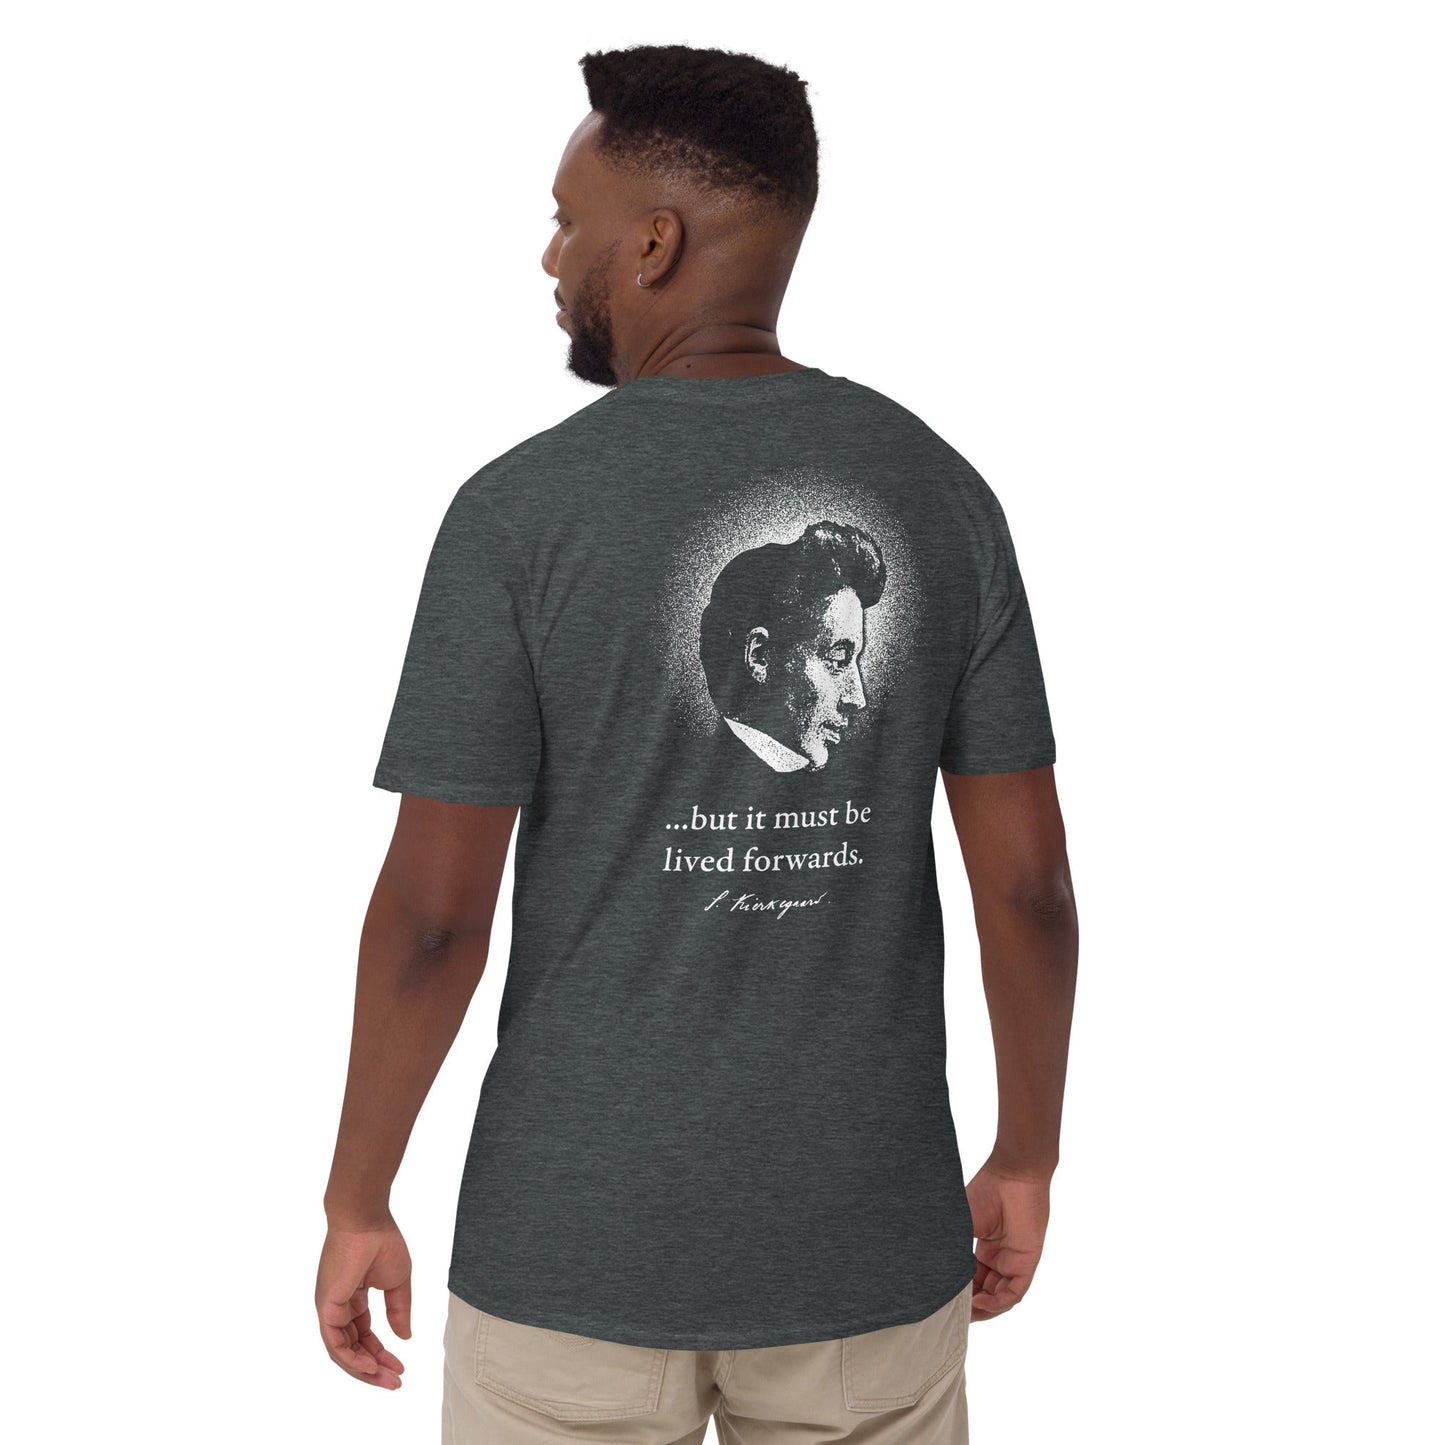 Kierkegaard Quote - Life can only be understood backwards - Premium T-Shirt